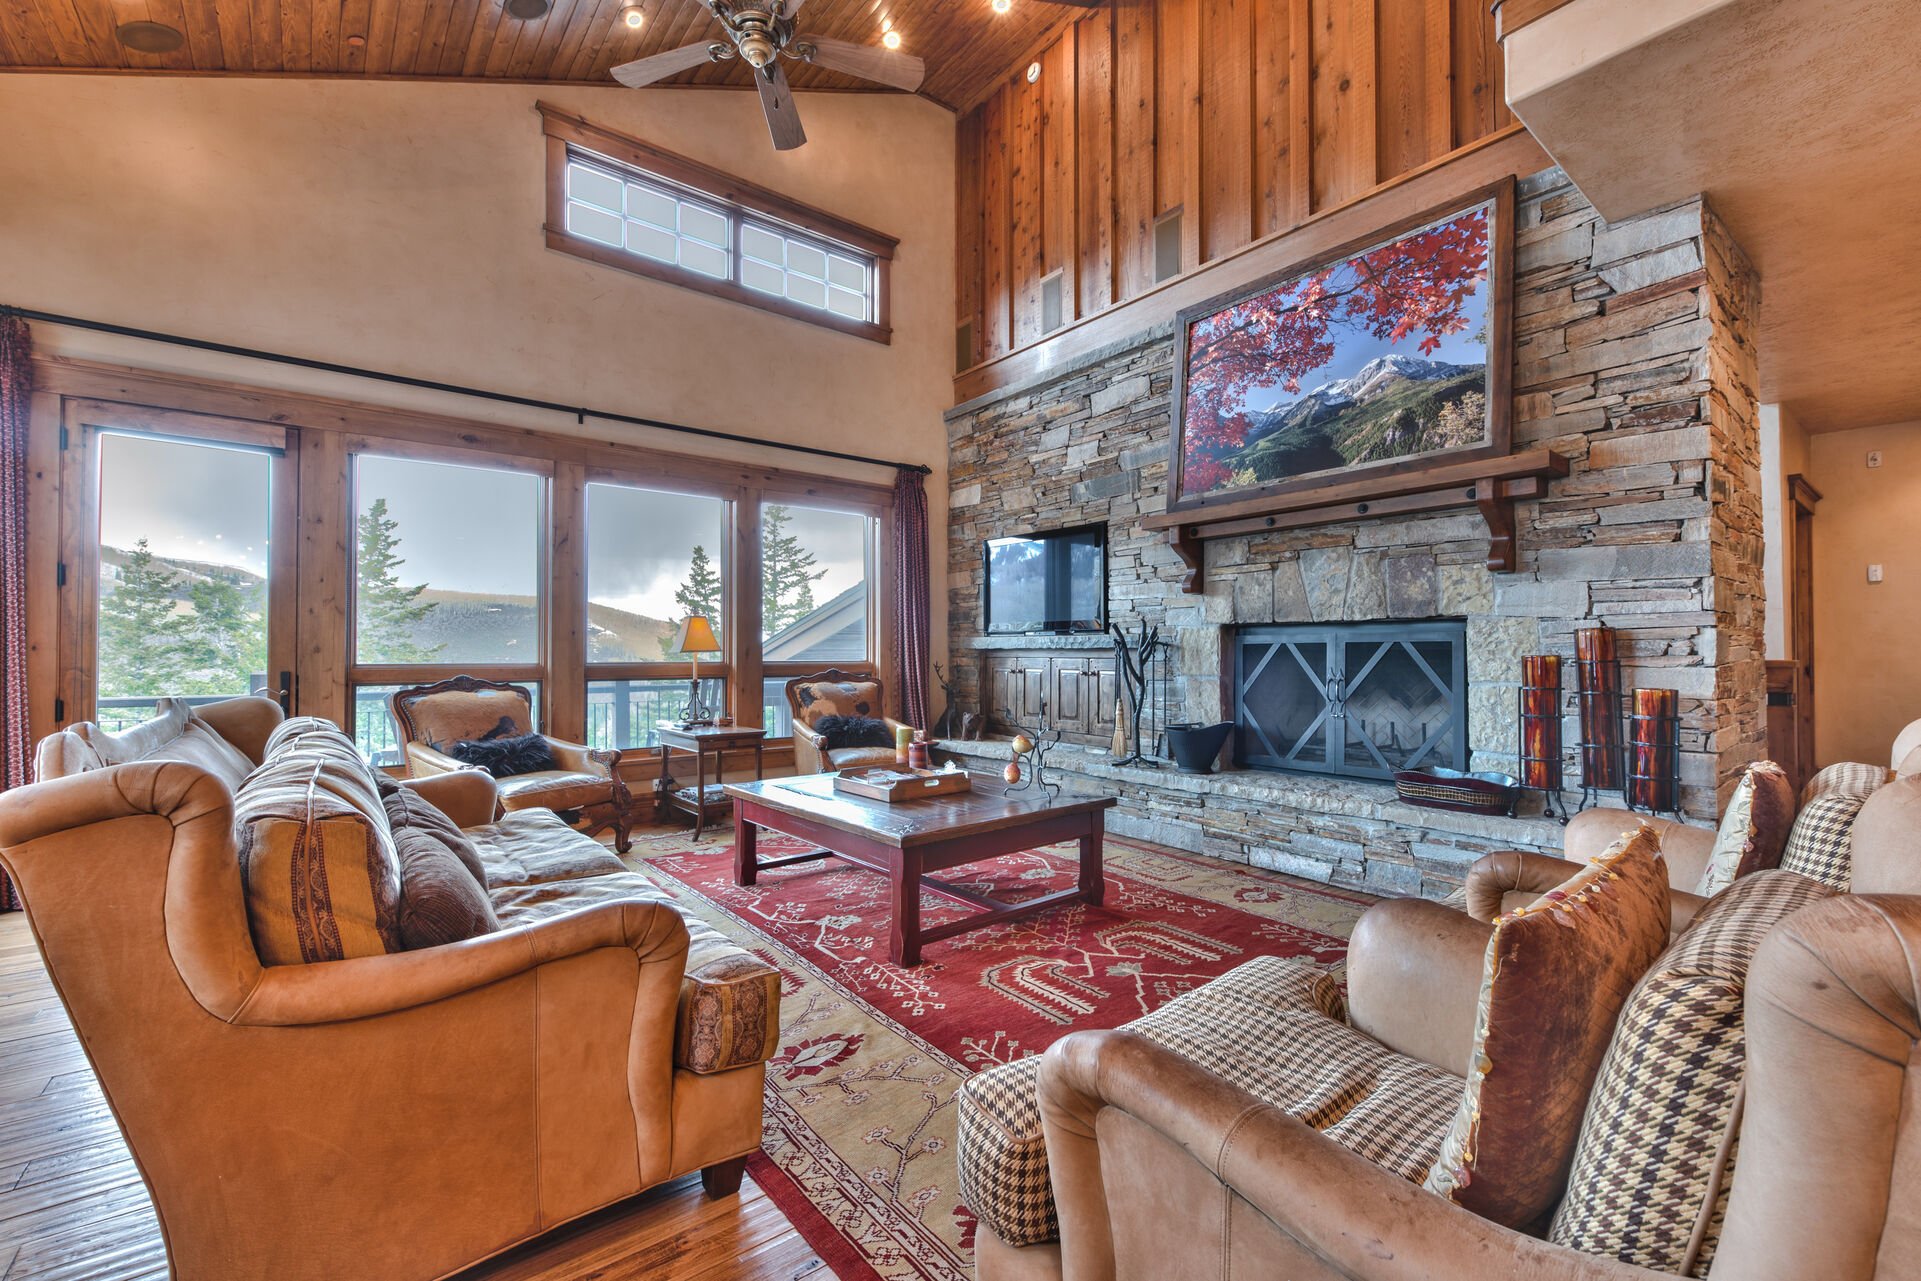 Spacious Living Room with Mountain Furnishings, a Wood Burning Fireplace, 50'' HDTV, Hardwood Flooring, and Mountain Views